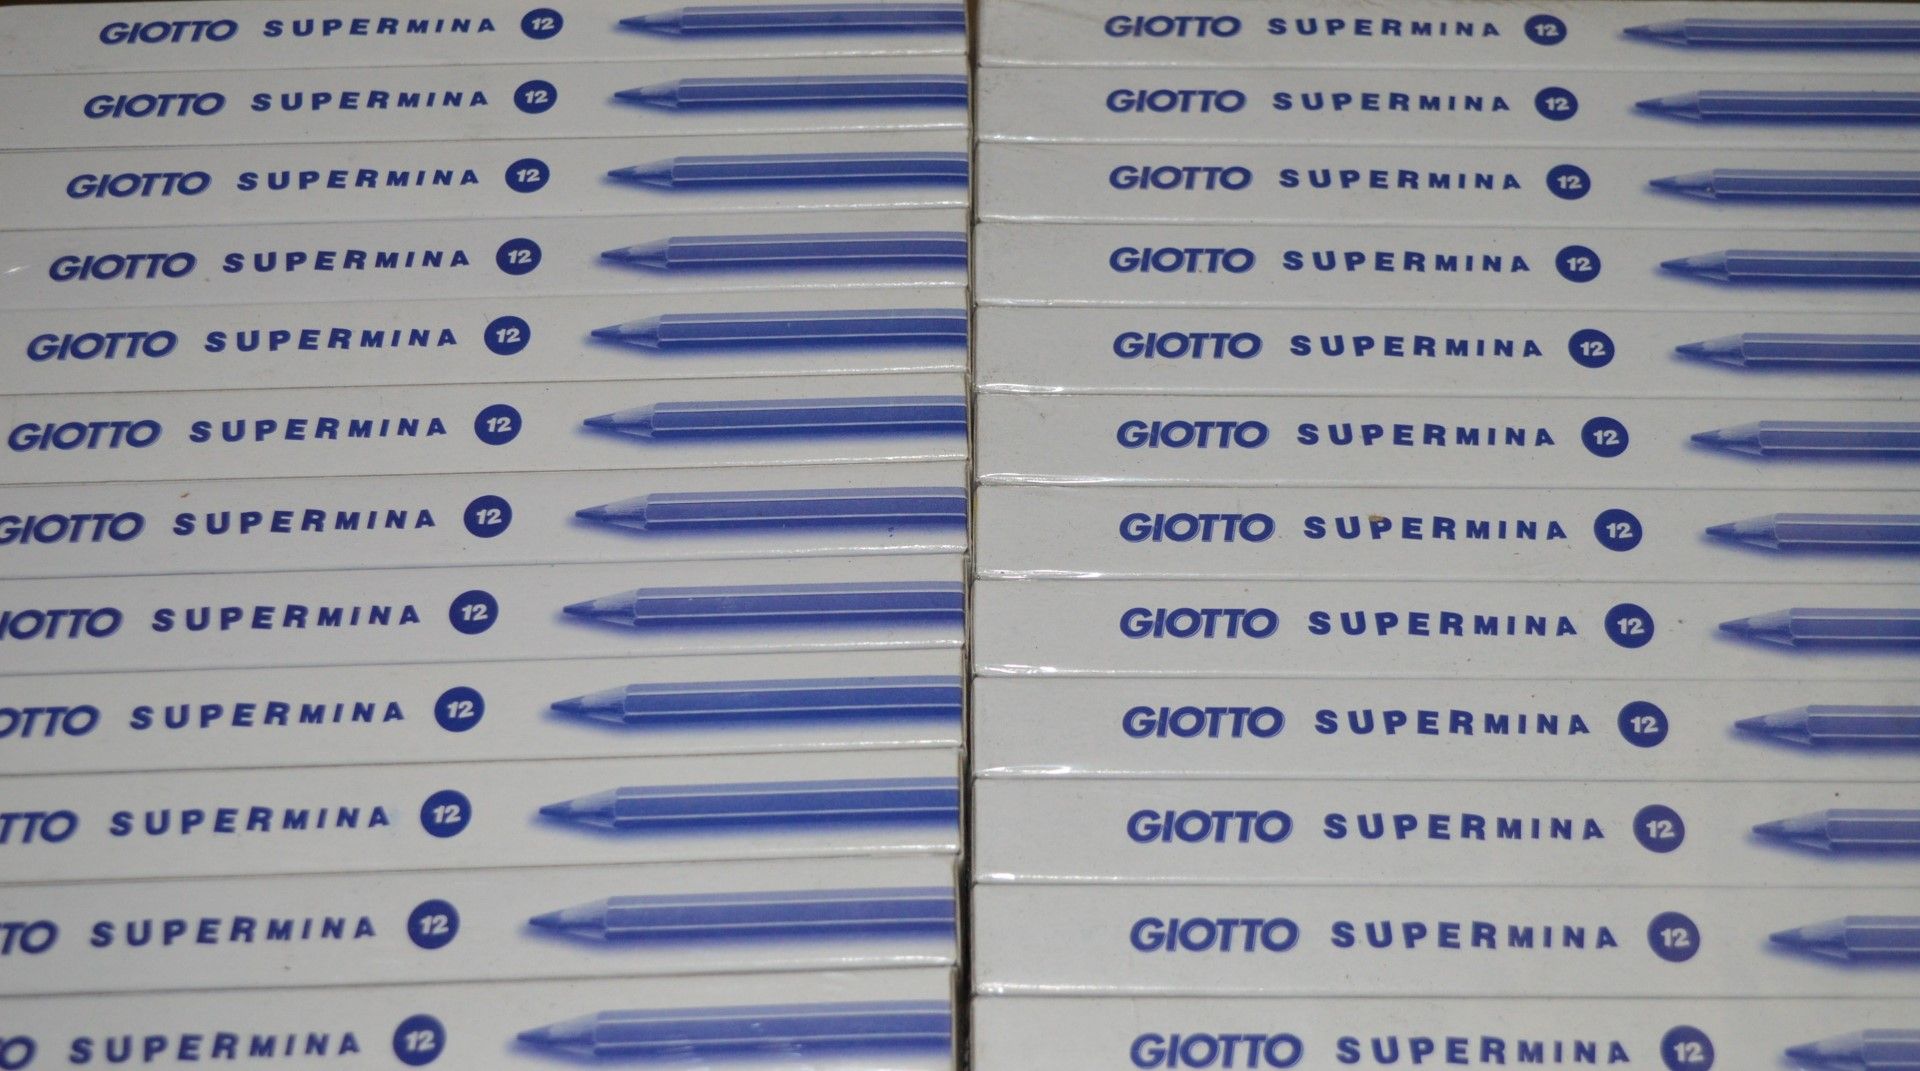 36 x Packs of Giotto Supermina 3.8mm Blue Pencils - High Quality Pencils Packed in Boxes of 12 - - Image 10 of 10